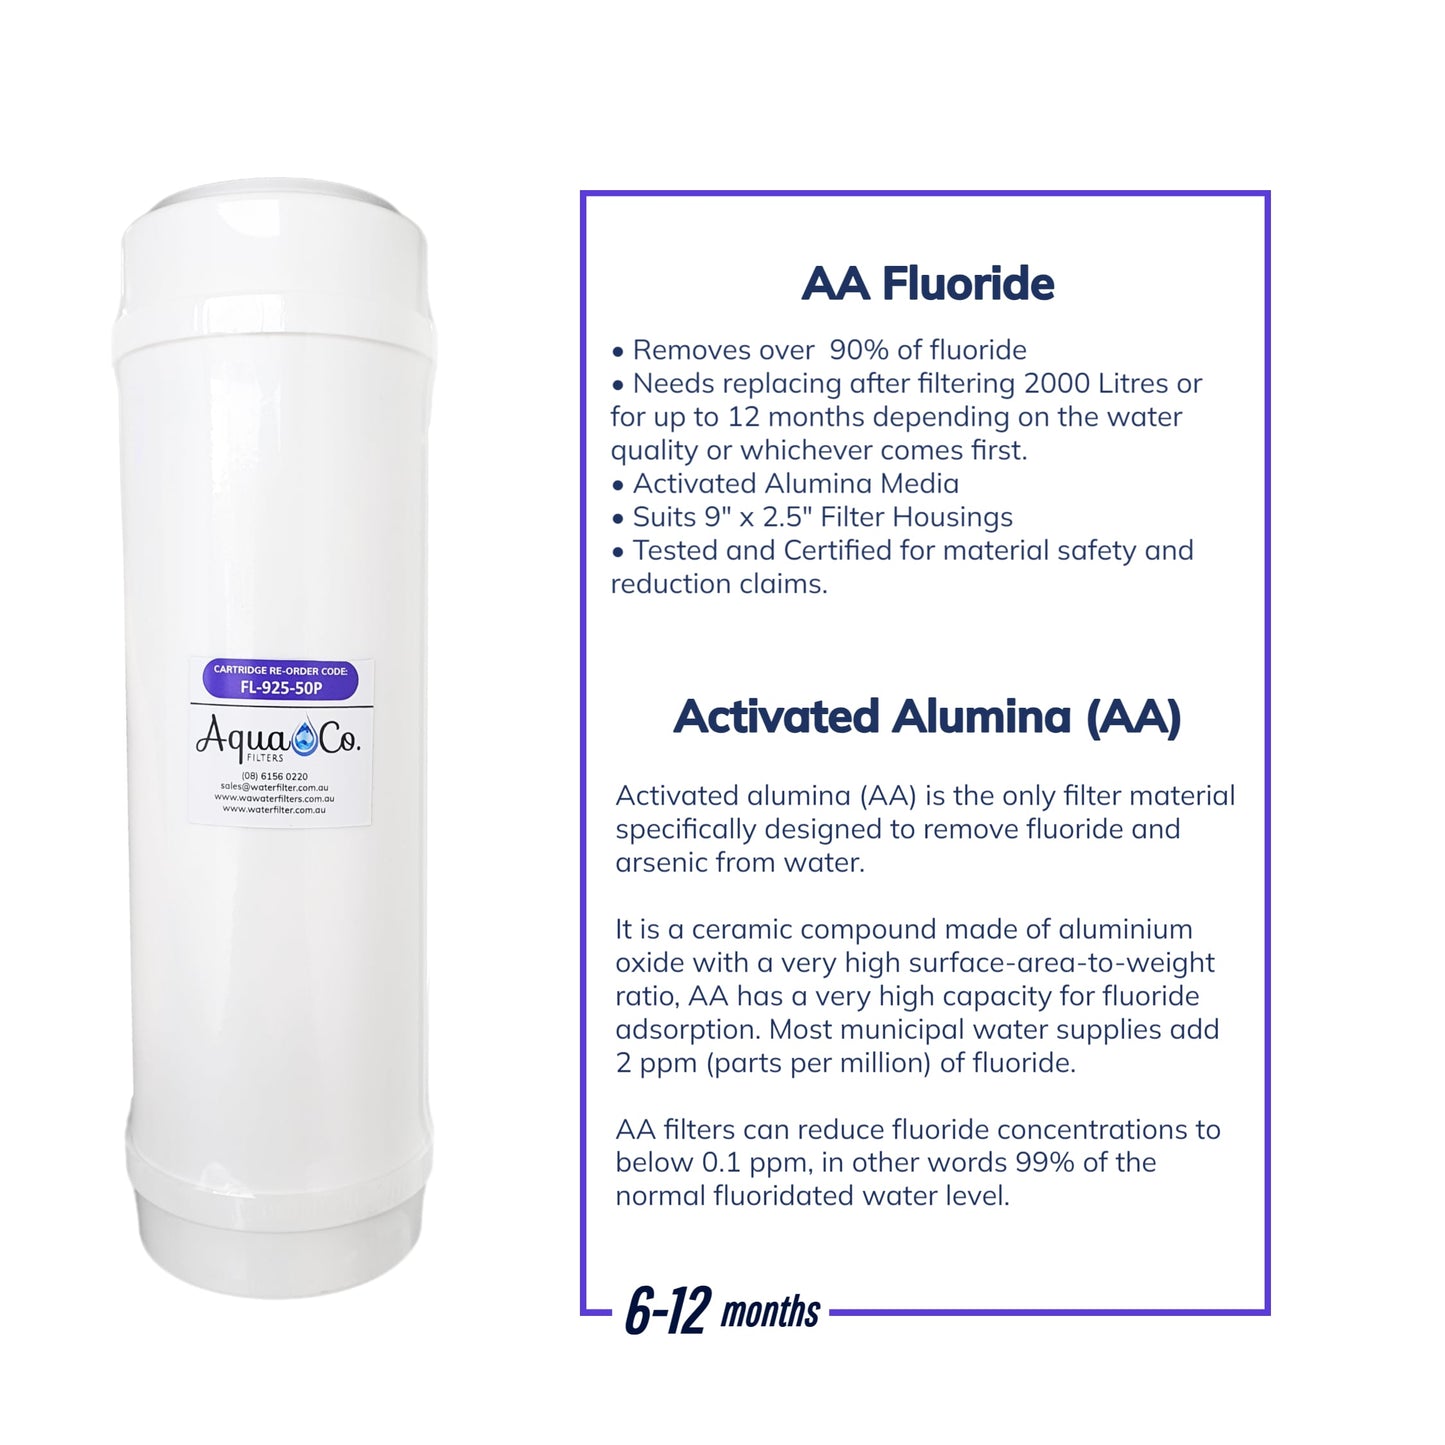 AquaCo 9" x 2.5" Fluoride Removal Replacement Filter